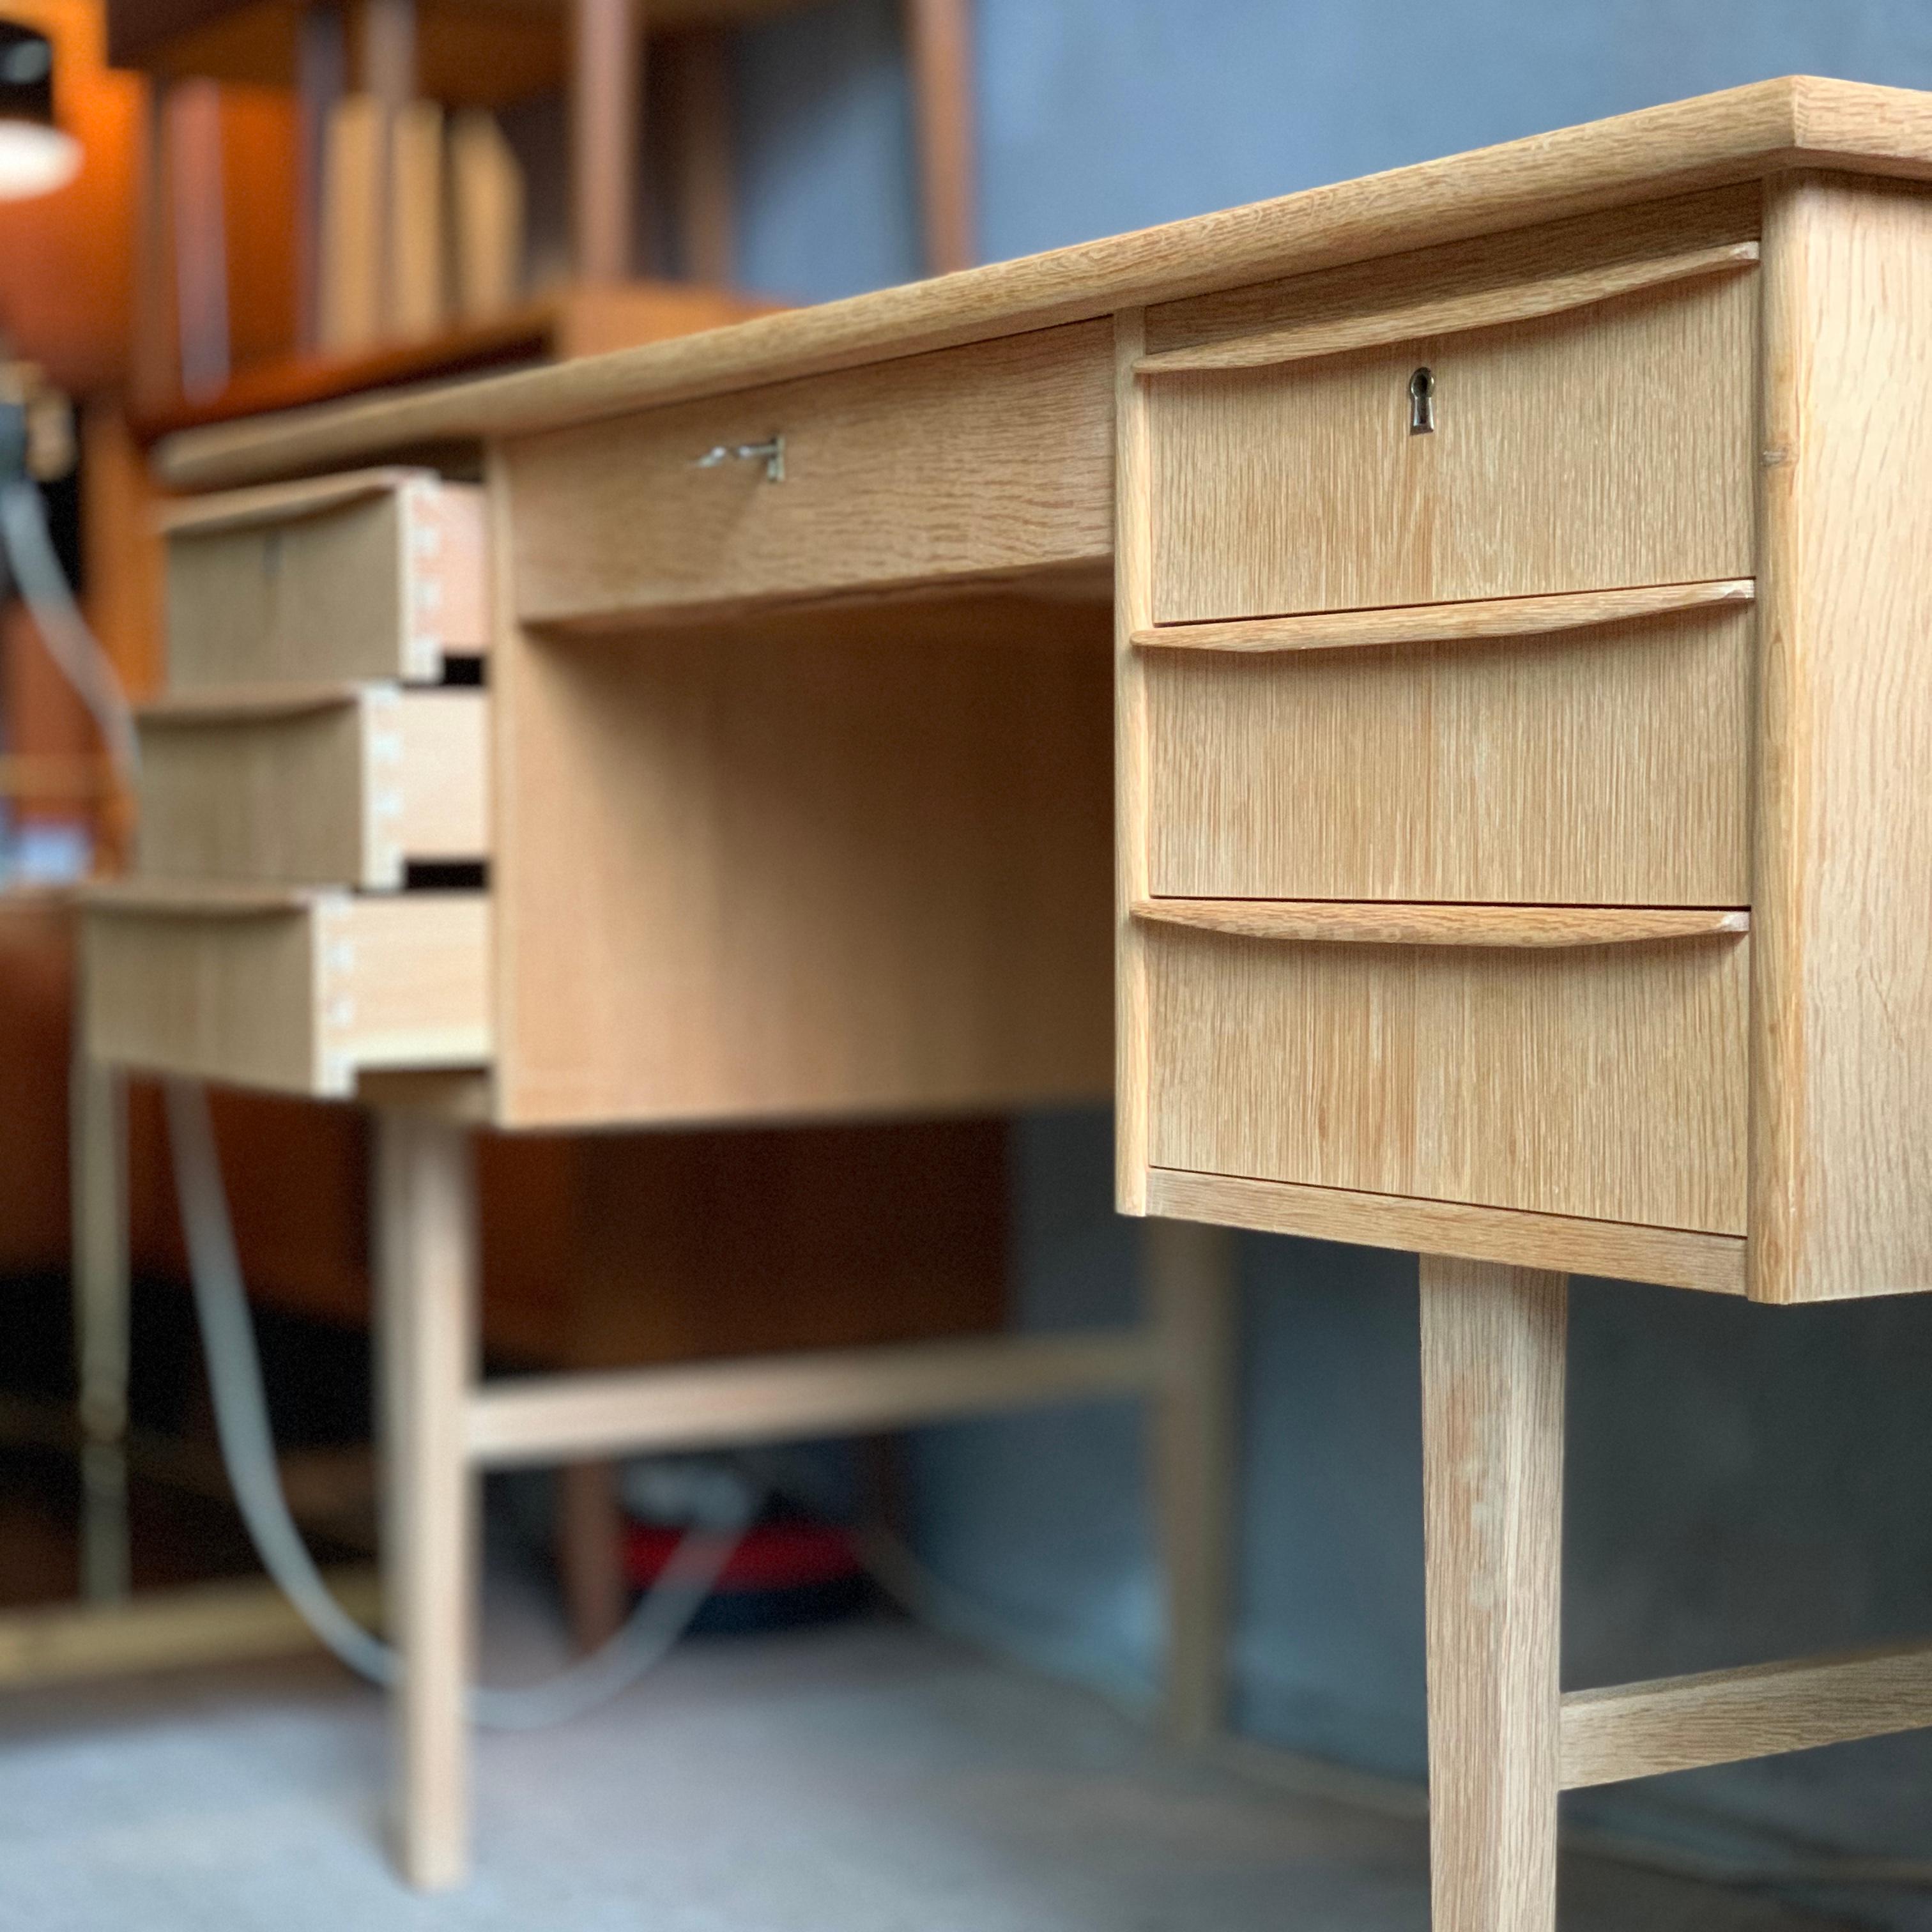 This is a high quality writing desk designed and manufactured in Denmark in the 1960s.
The cabinetmaker has used the type of oak called pendunculate which gives the table unique simplicity and softness. The table seem almost as new but still shares